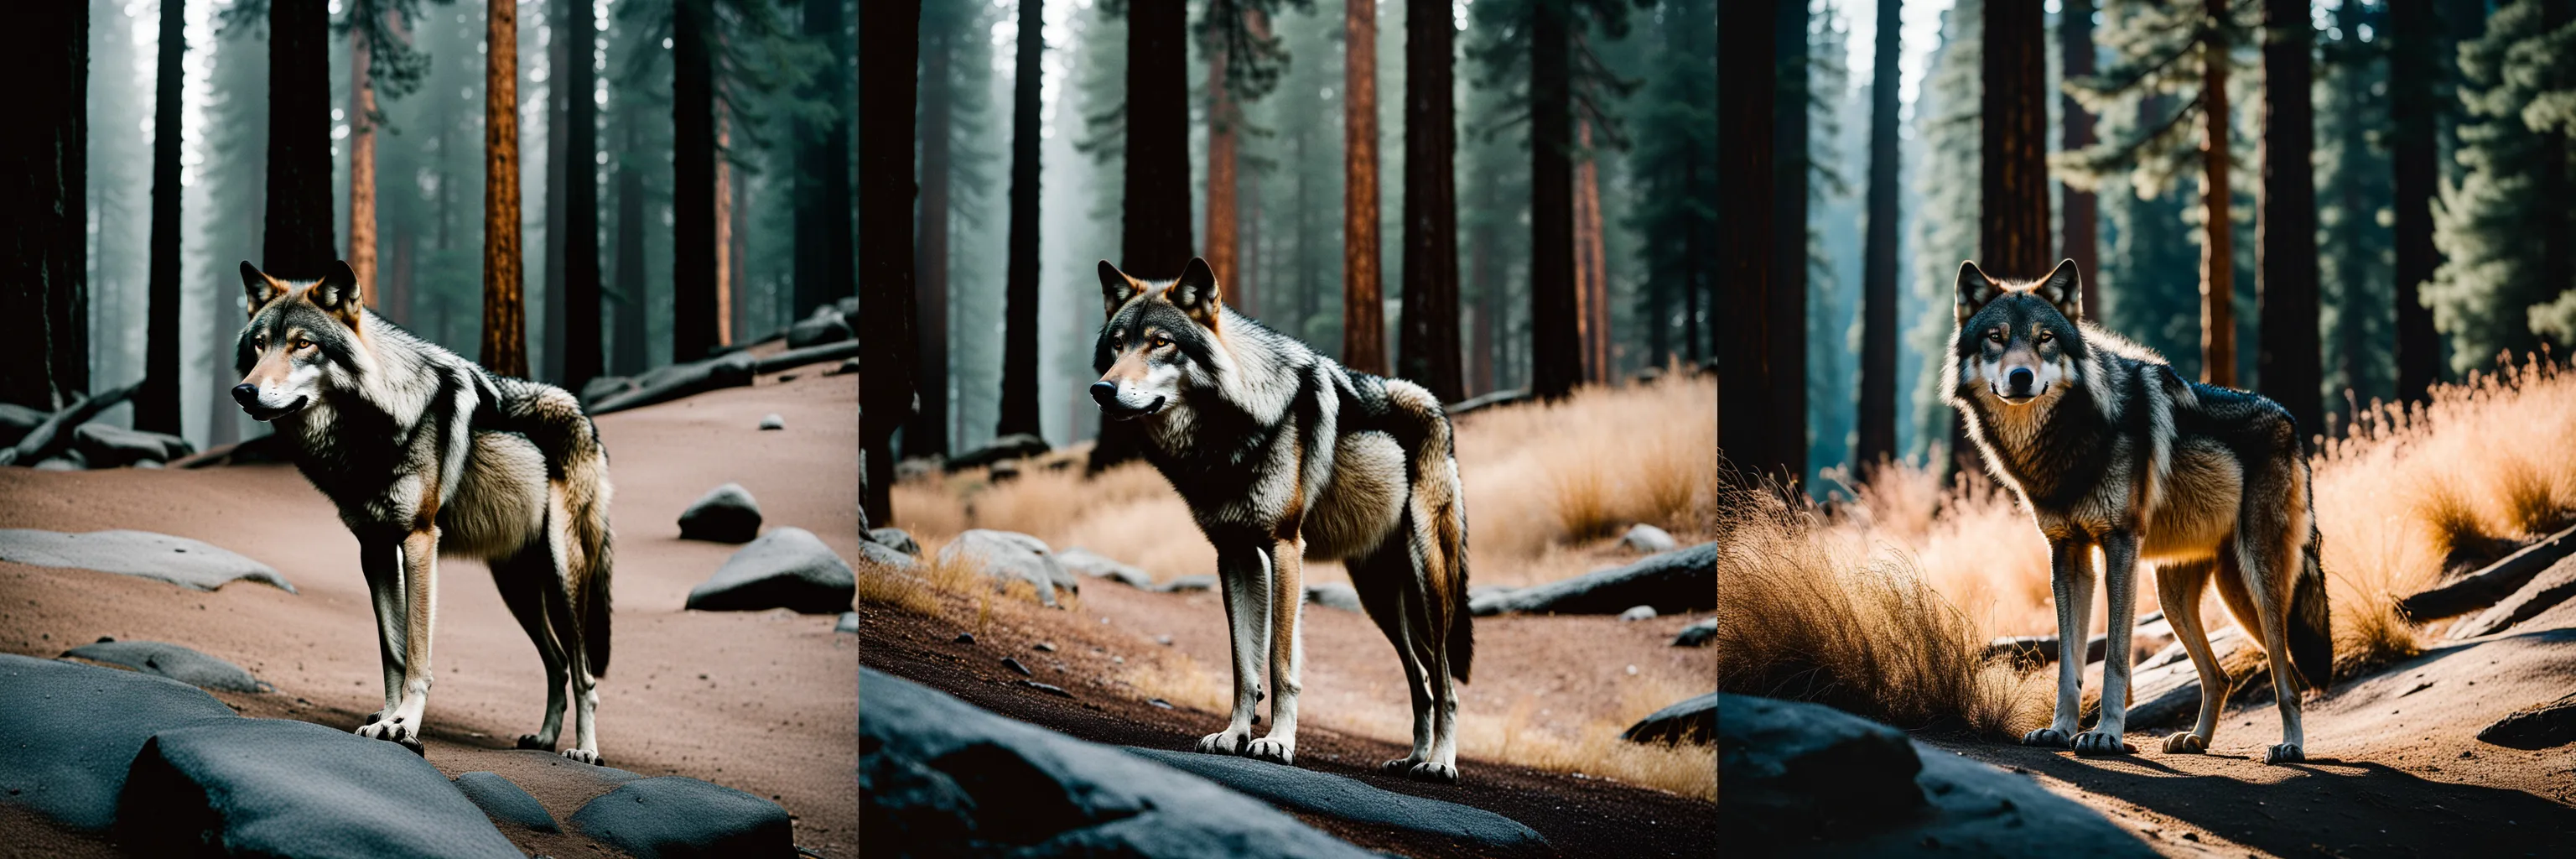 A wolf in Yosemite National Park, chilly nature documentary film photography